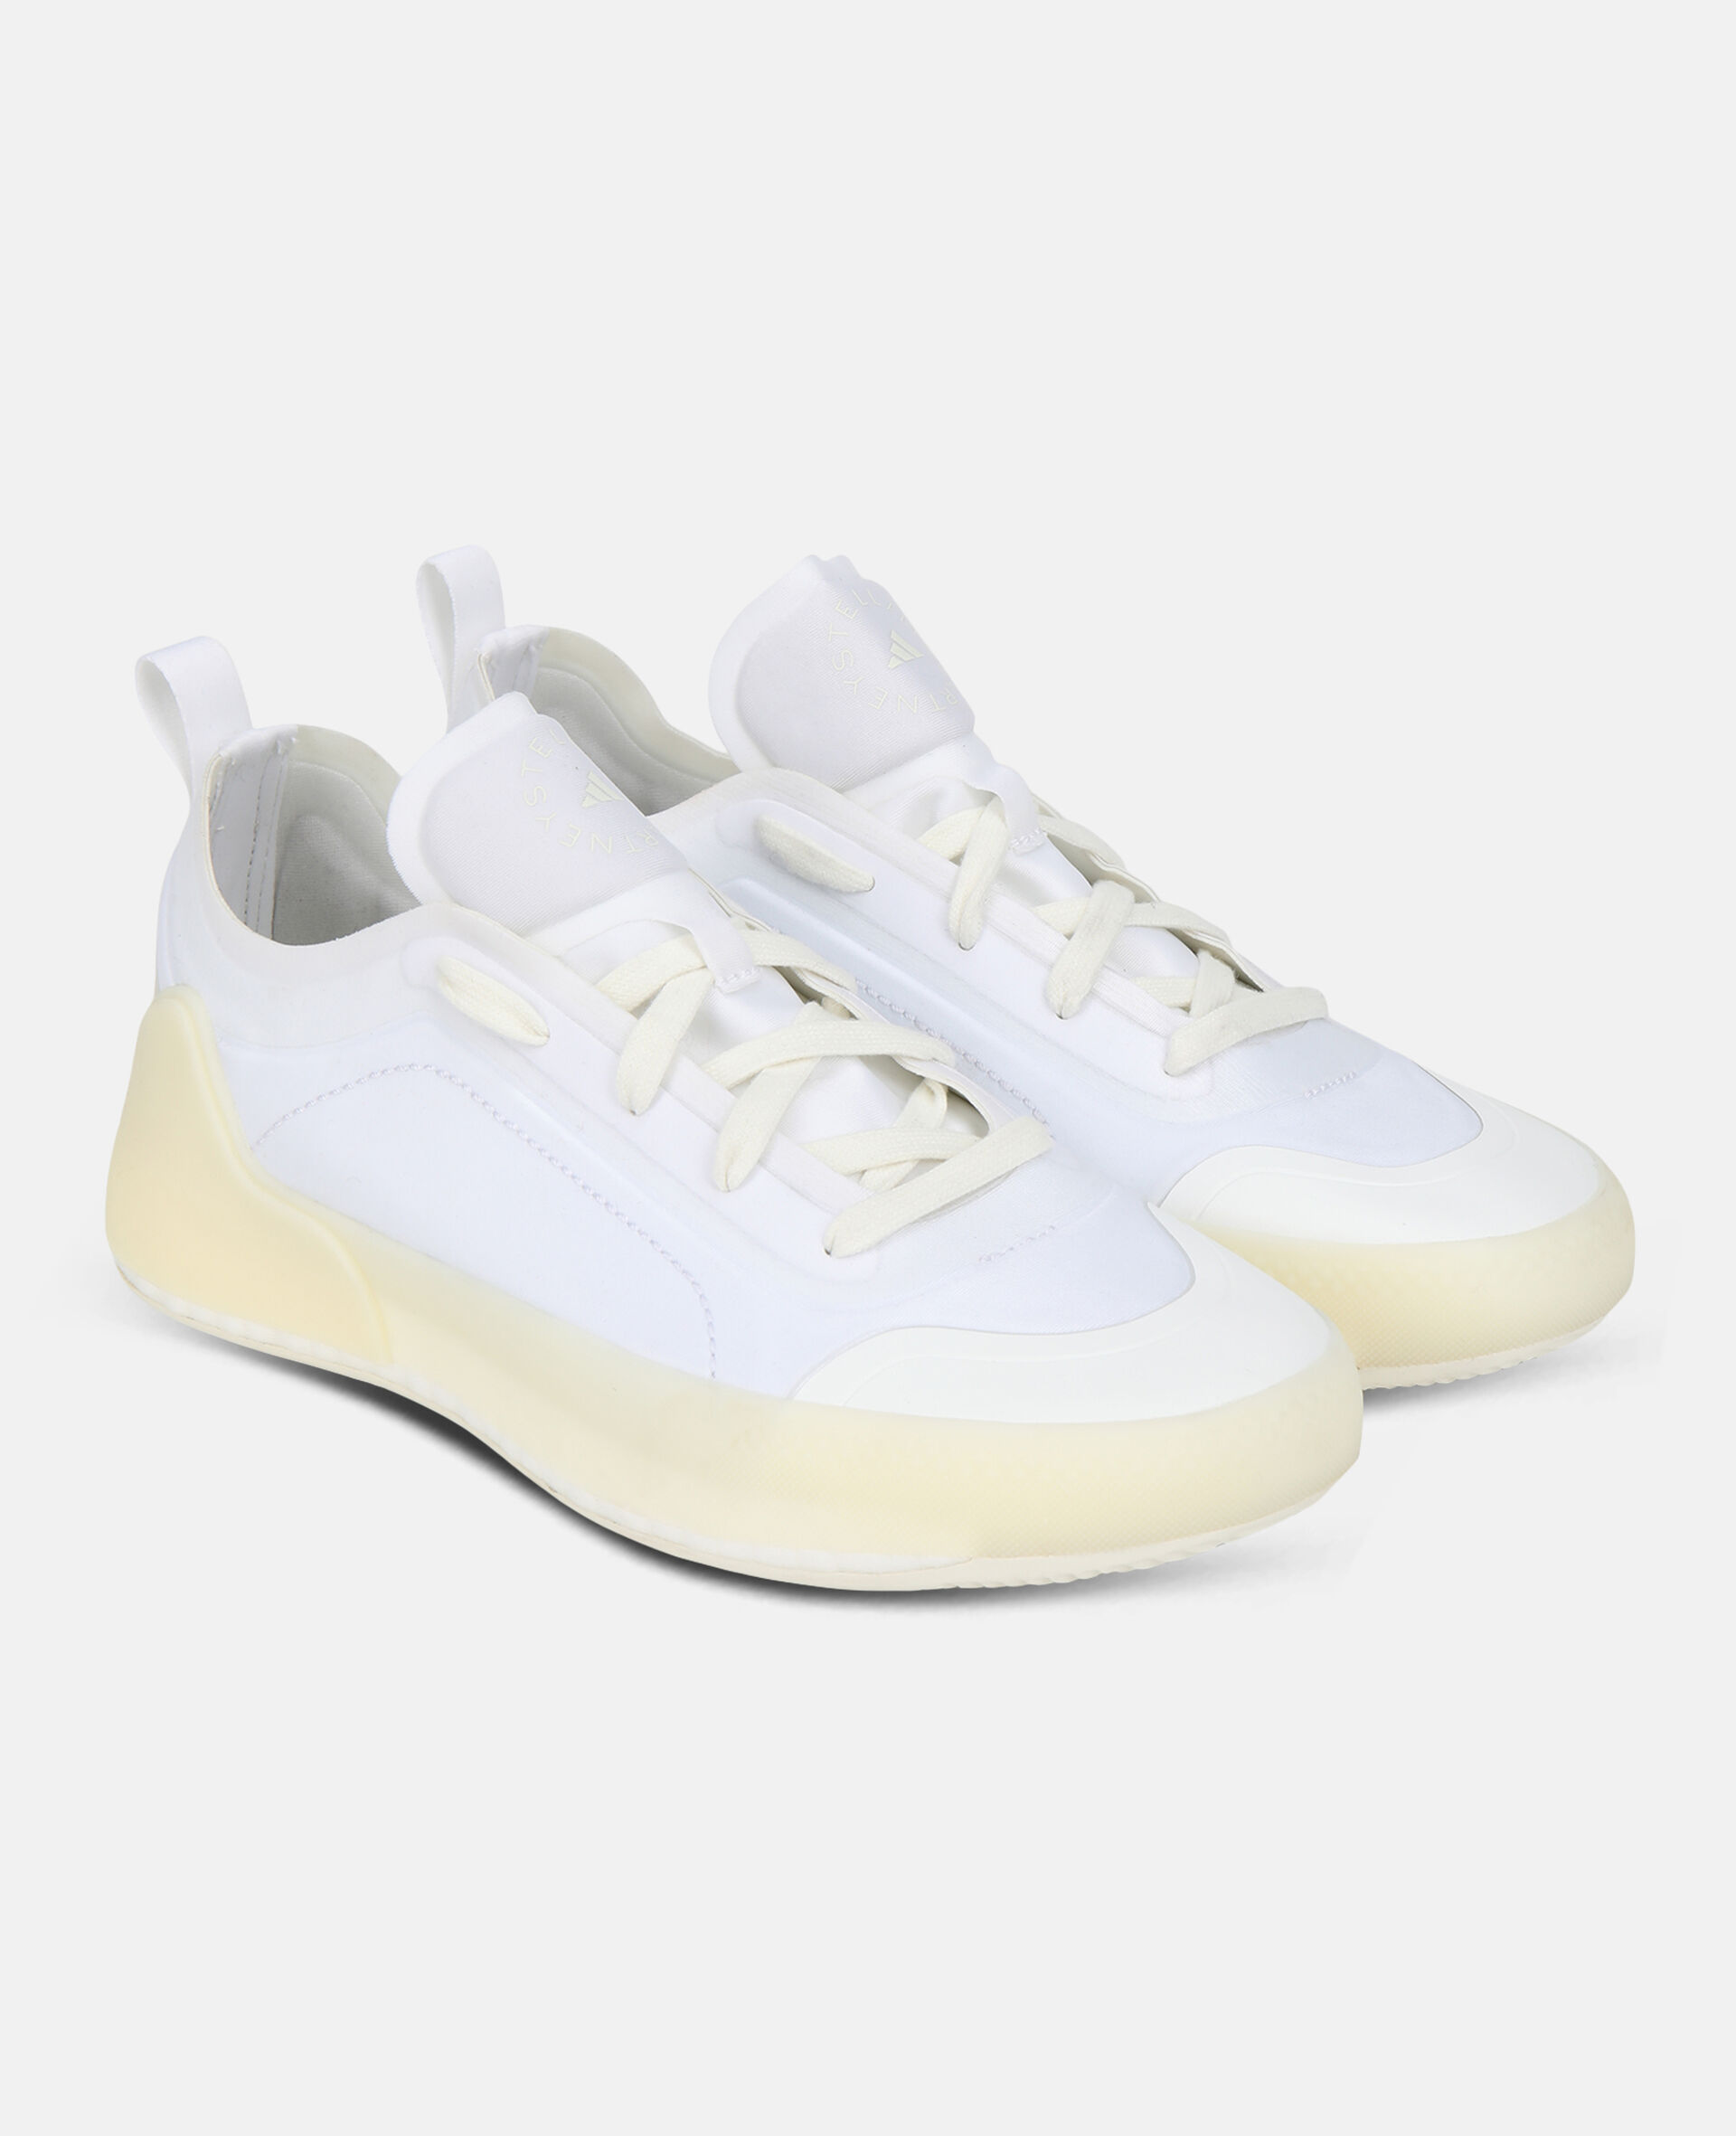 White Boost Treino Sneakers-White-large image number 3